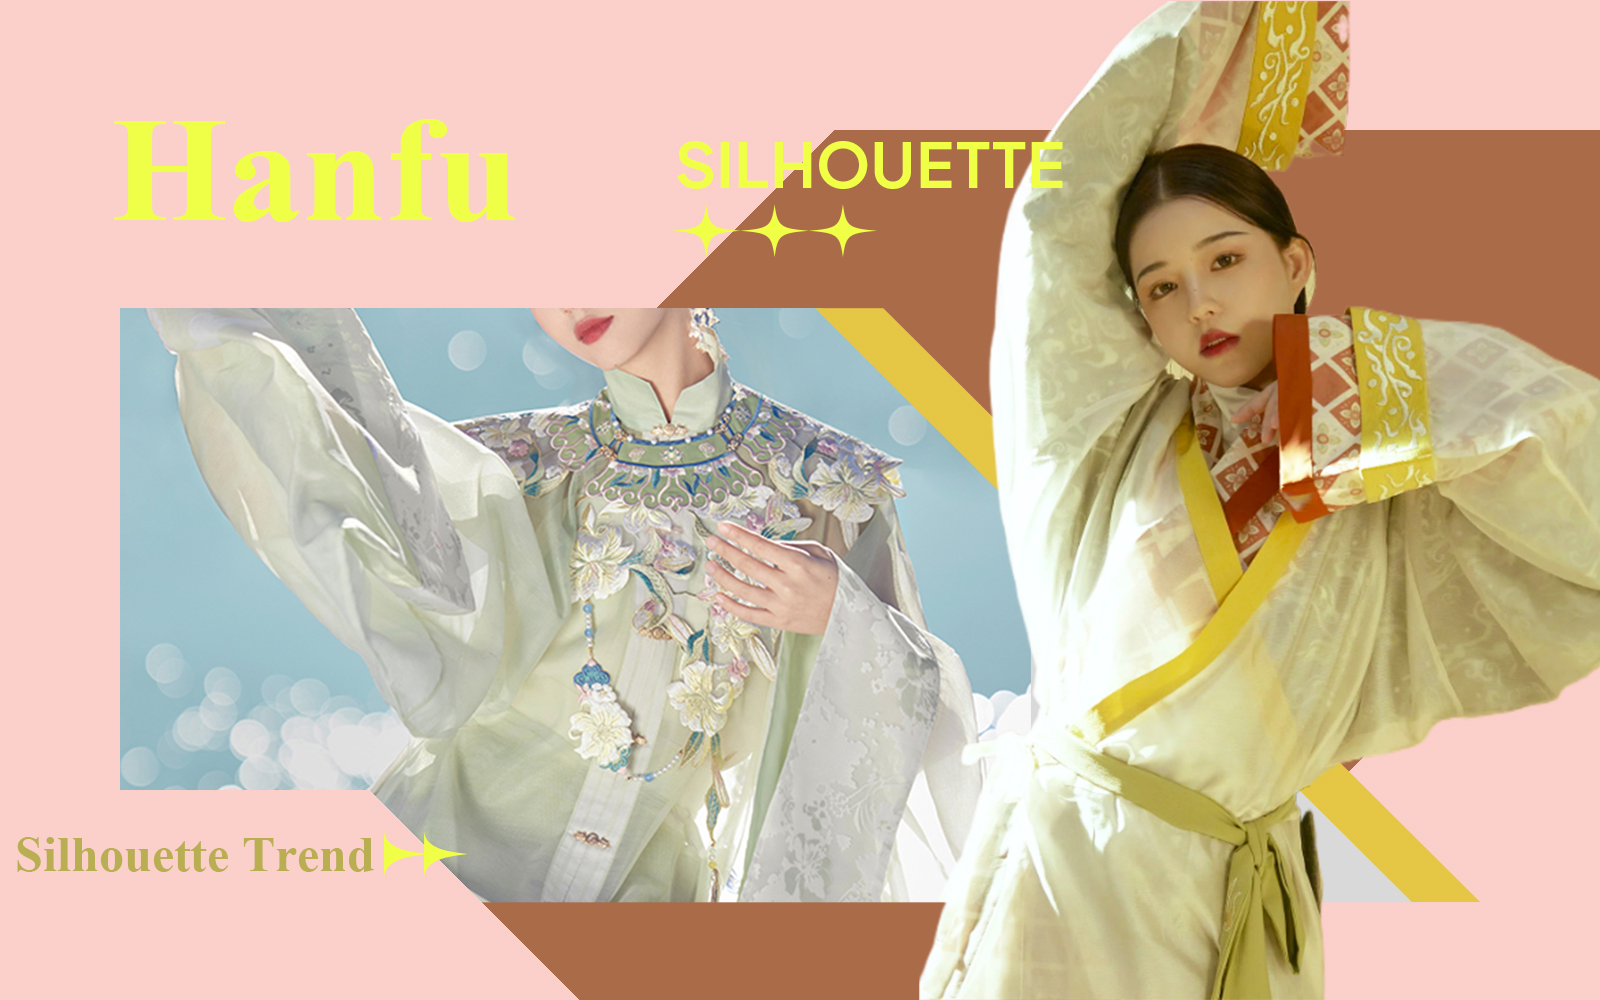 The Silhouette Trend for Women's Hanfu